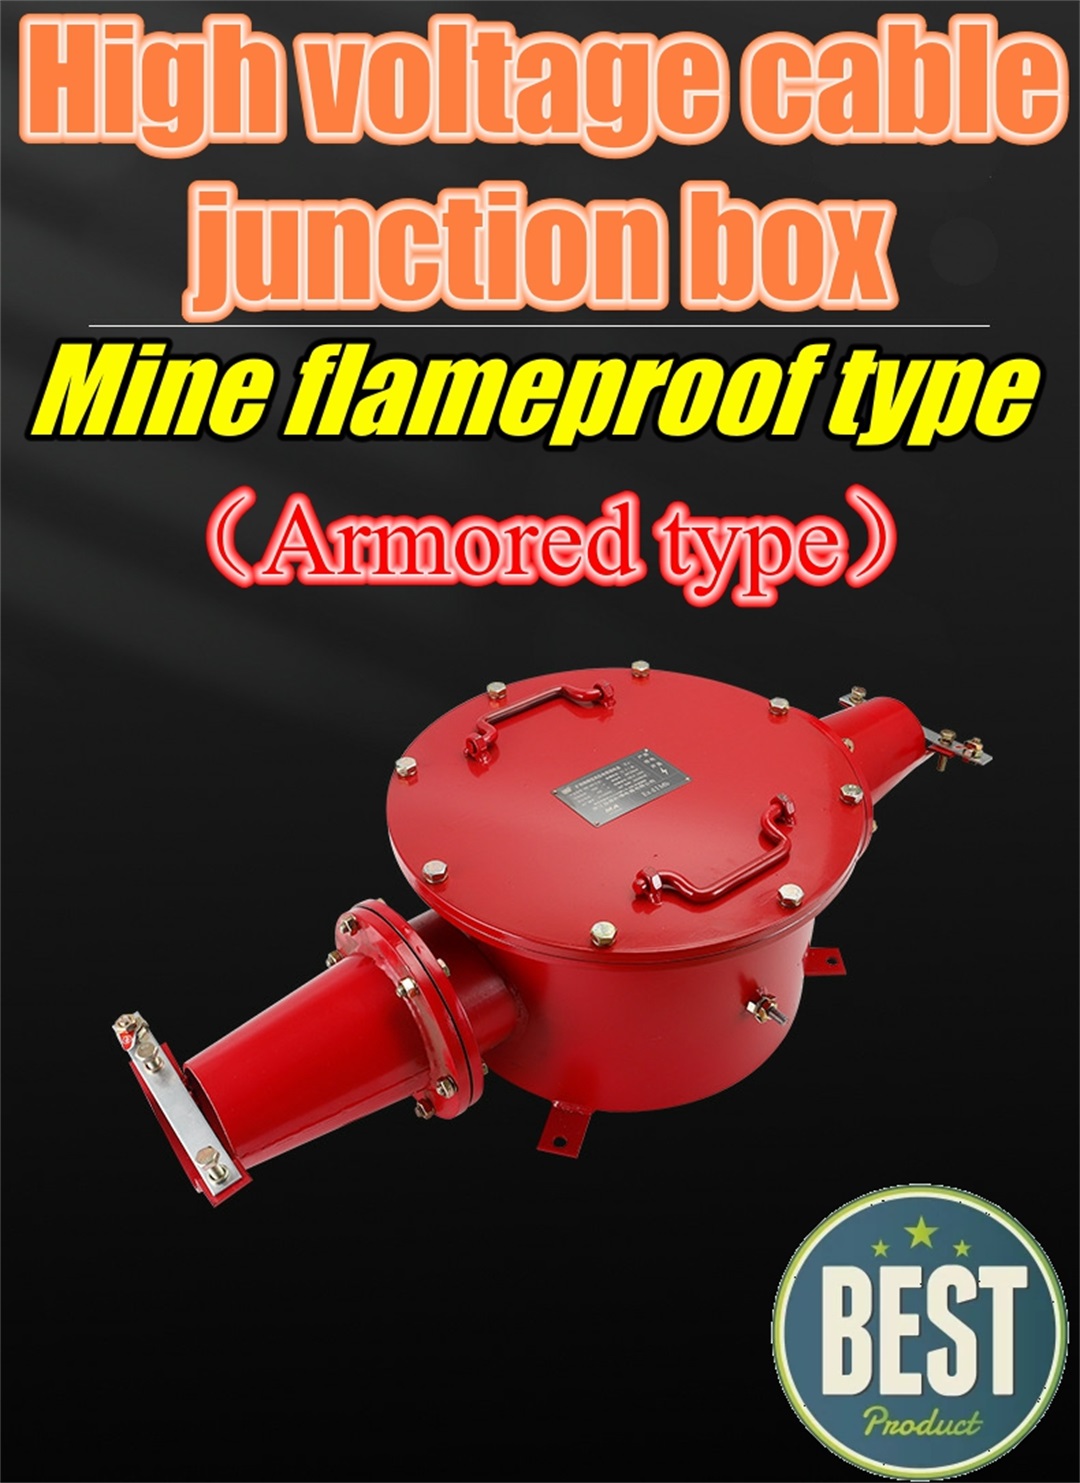 Mine explosion-proof high-voltage cable junction box